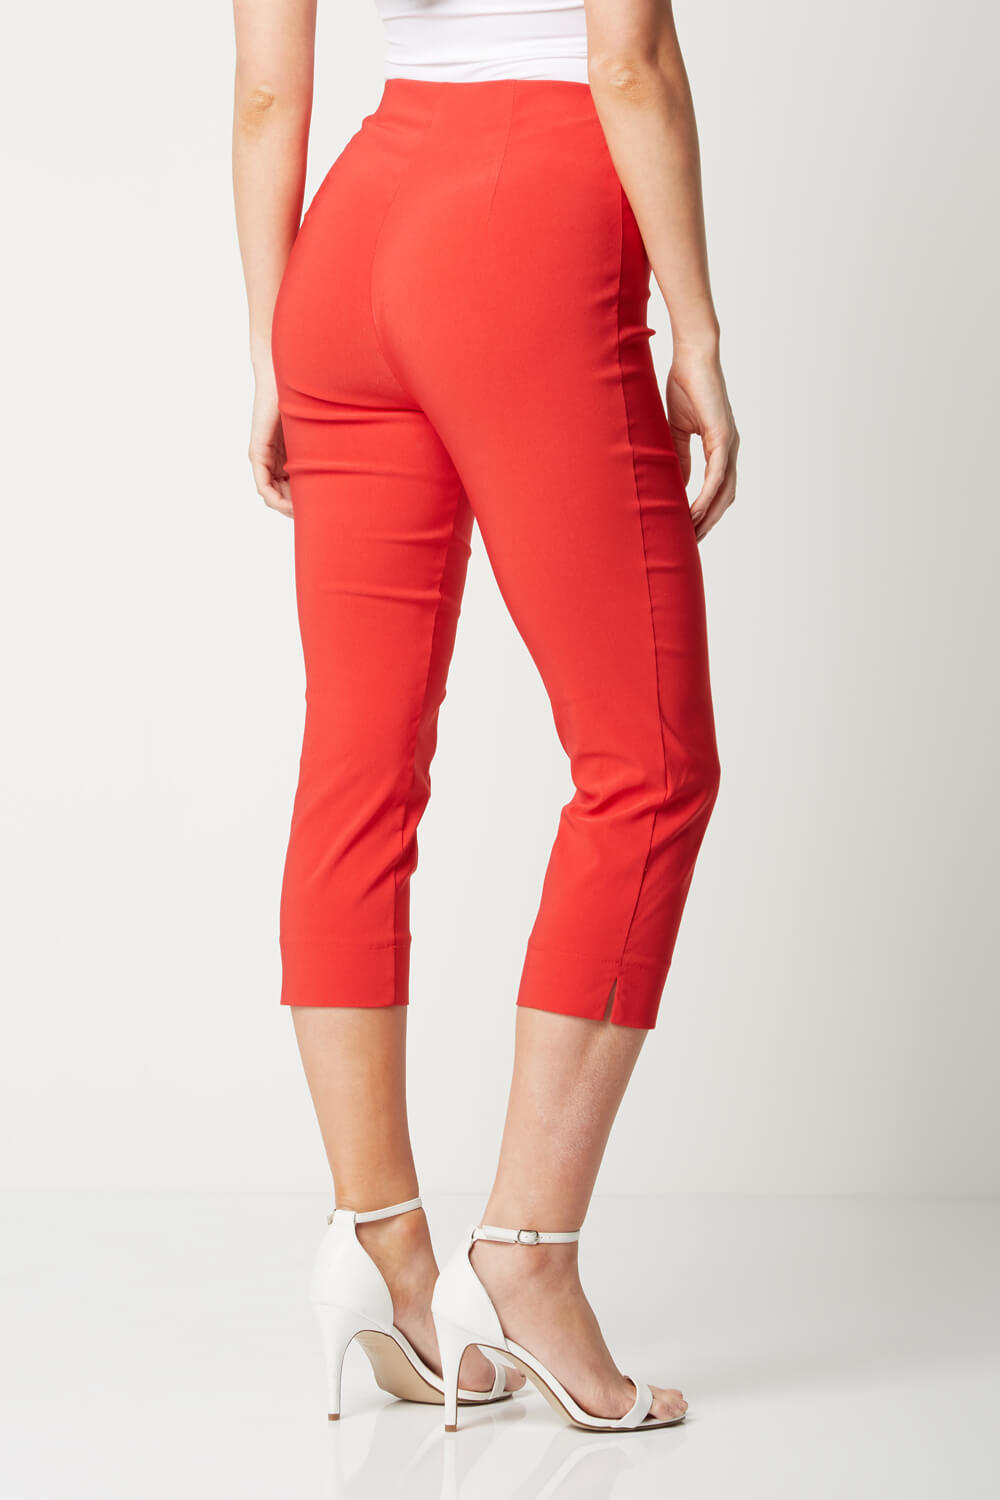 Red Cropped Stretch Trouser, Image 3 of 5